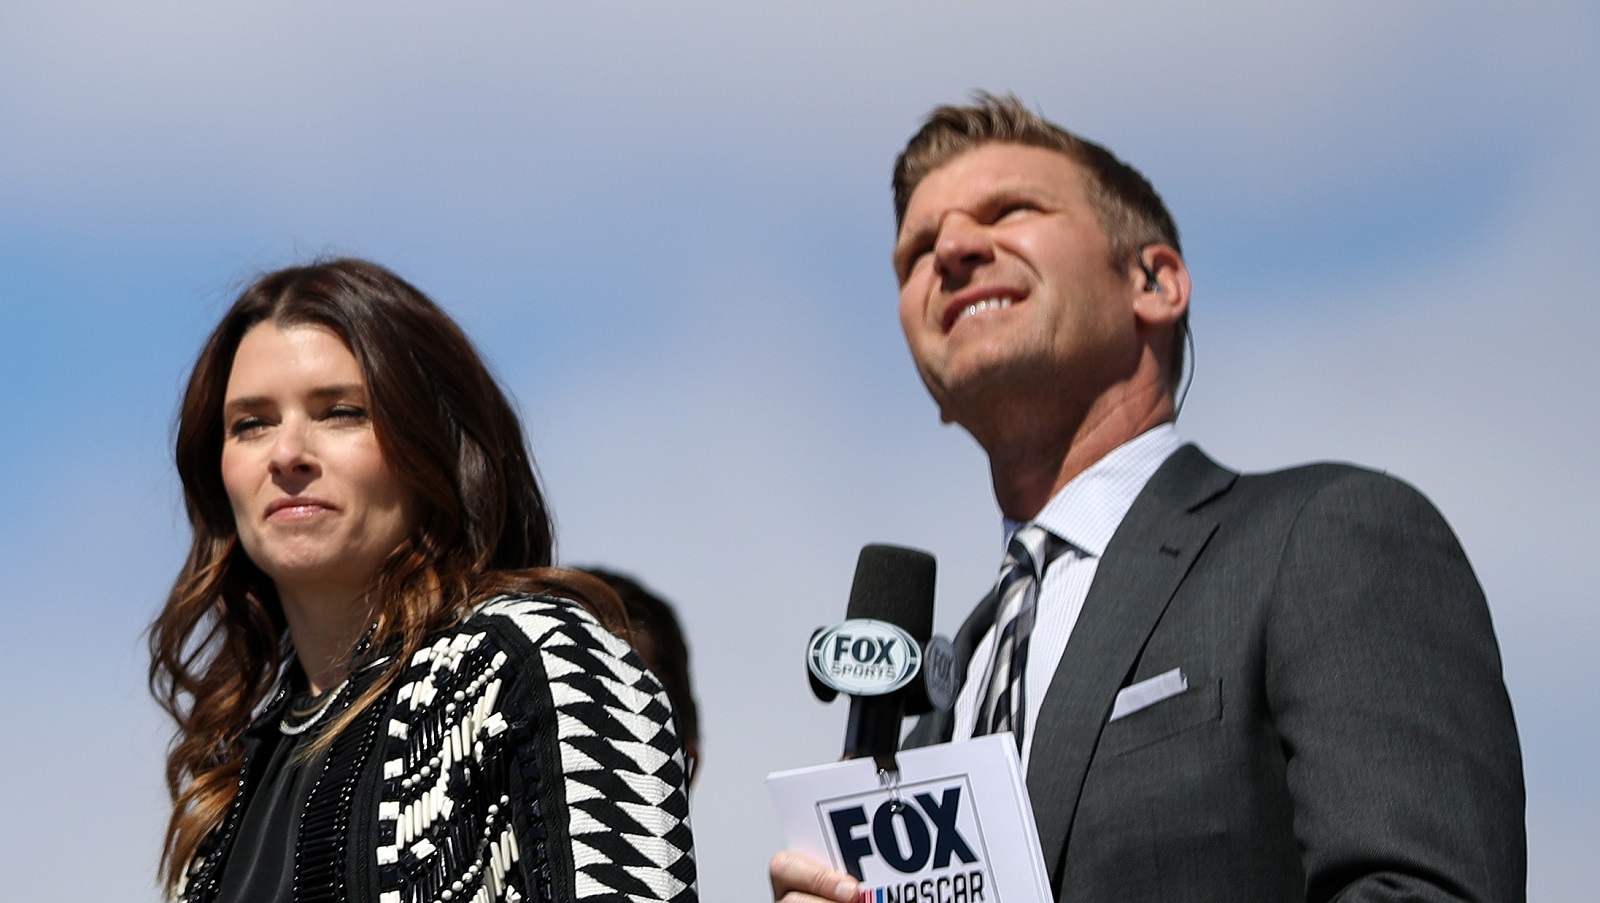 Fox Sports commentators Danica Patrick and Clint Bowyer  look on during ceremonies prior to the NASCAR Cup Series Pennzoil 400 at Las Vegas Motor Speedway on March 6, 2022. | Meg Oliphant/Getty Images